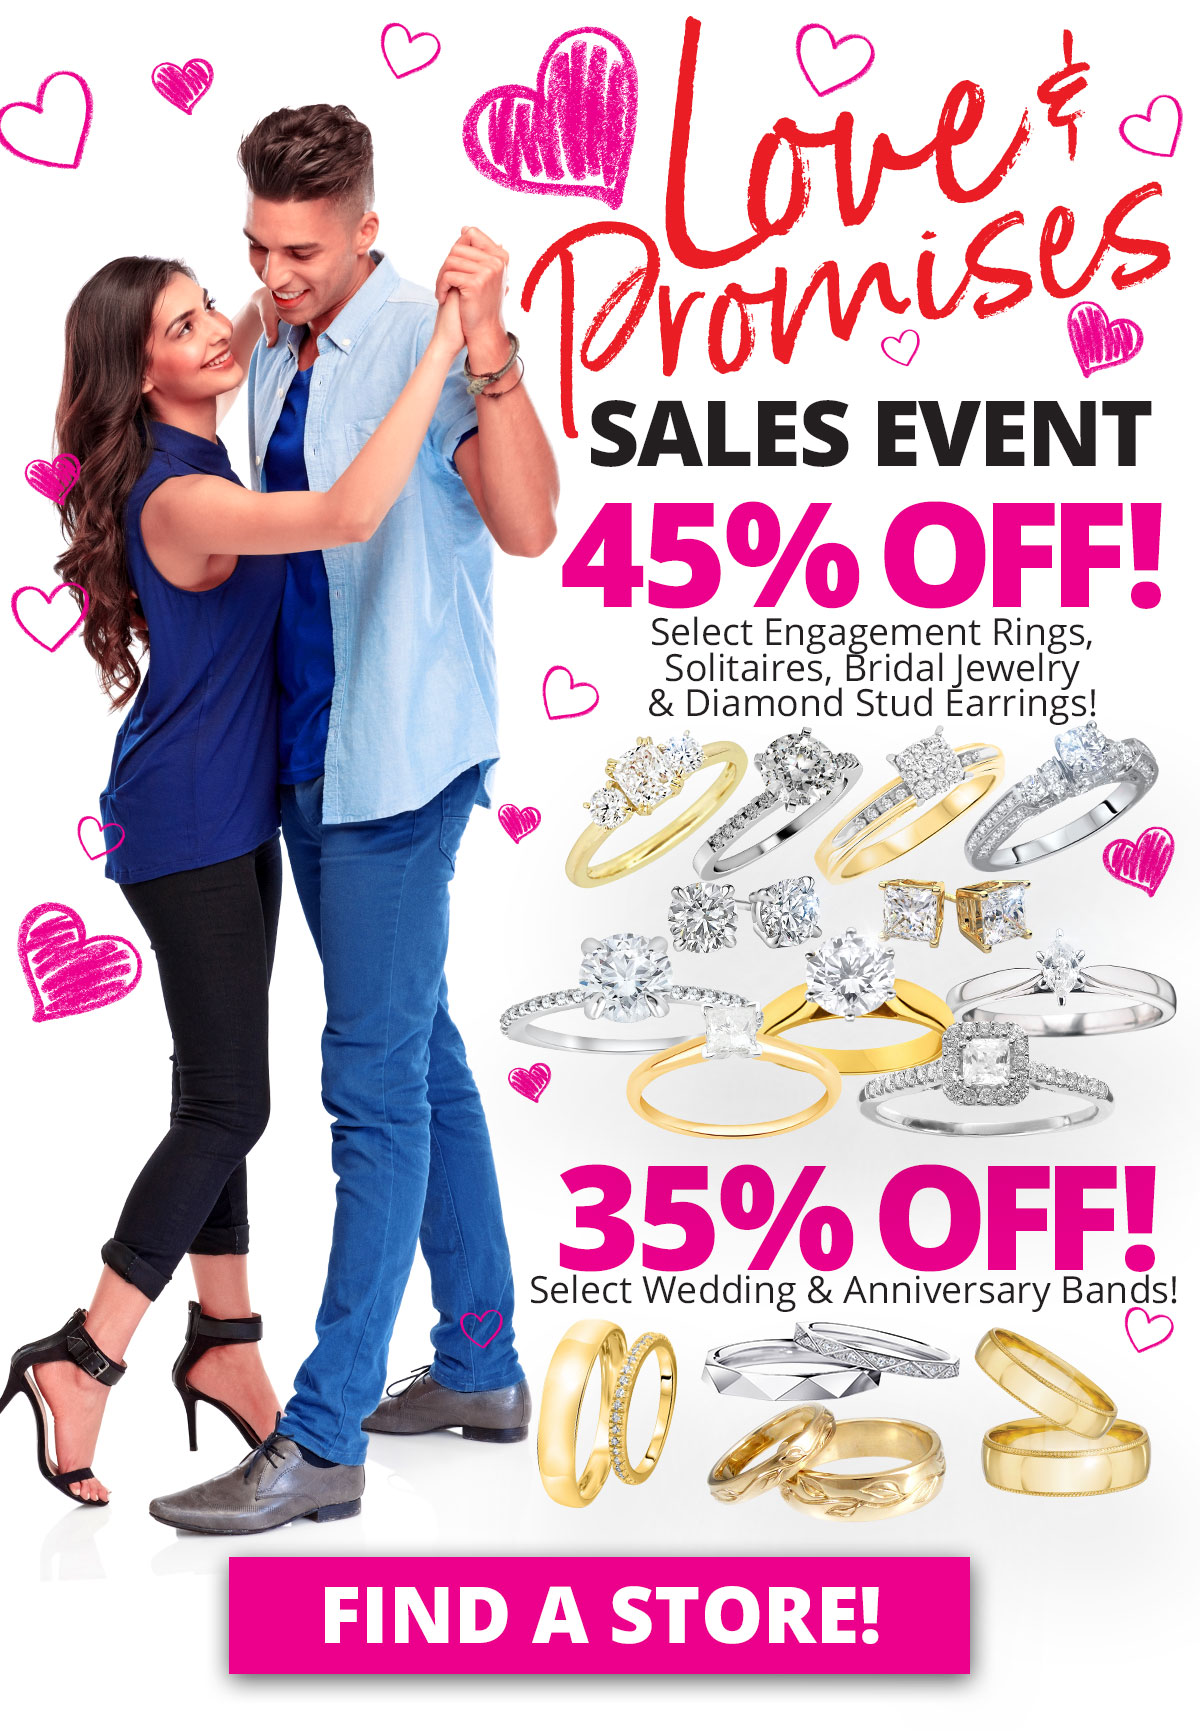 Love & Promises SALES EVENT 45% OFF Select Engagement Rings, Solitaires, Bridal Jewelry & Diamond Stud Earrings! 35% OFF Select Wedding & Anniversary Bands! Sale Runs February 1 - 28, 2023. Layaway discounts must be reduced by 12.5%. Offer cannot be combined with any other offer. Discount not available on previously sold merchandise. Excludes all 3rd party appraised/certified jewelry. Rolex, gold and other high end watches excluded.